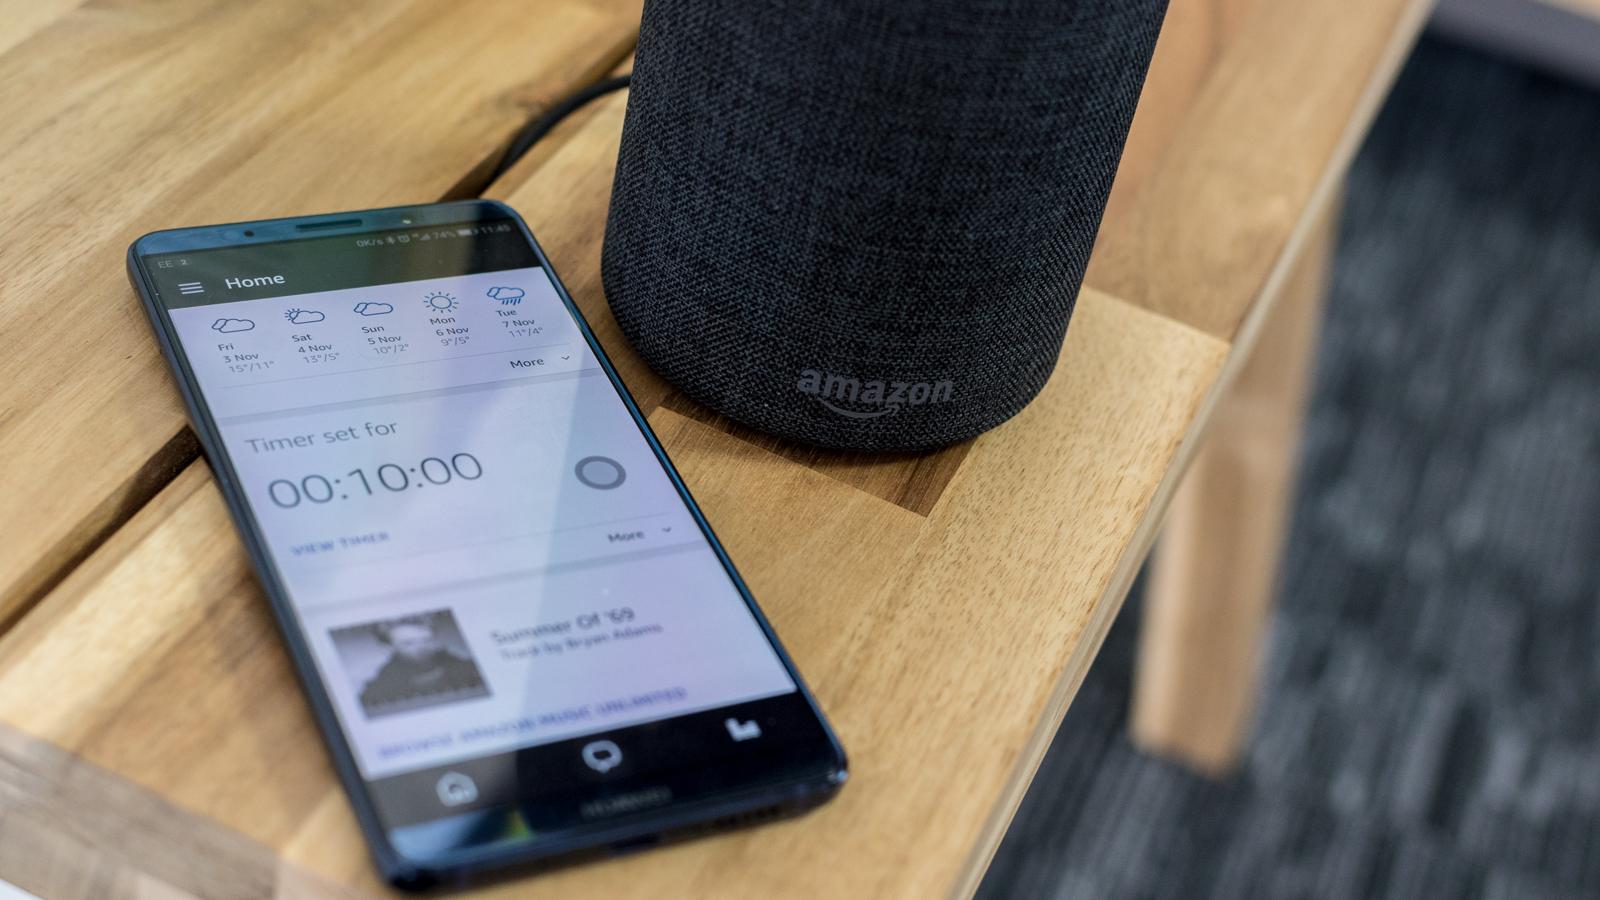 How To Stop Alexa From Saying “Now Connected”